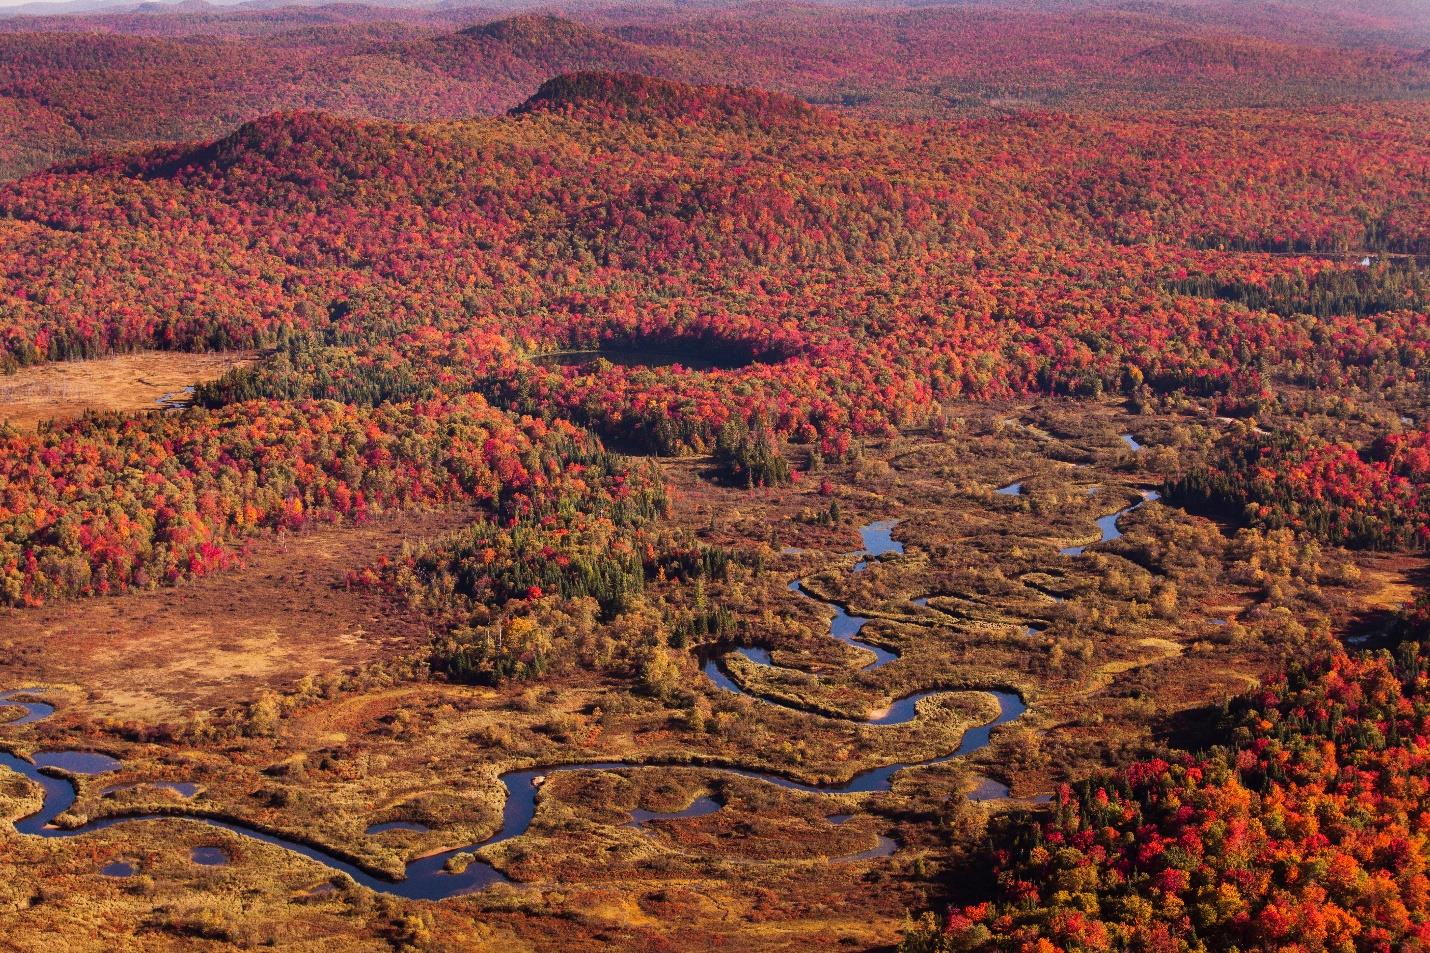 Aerial photo of the Moose River meandering through the Adirondack backgrountry.